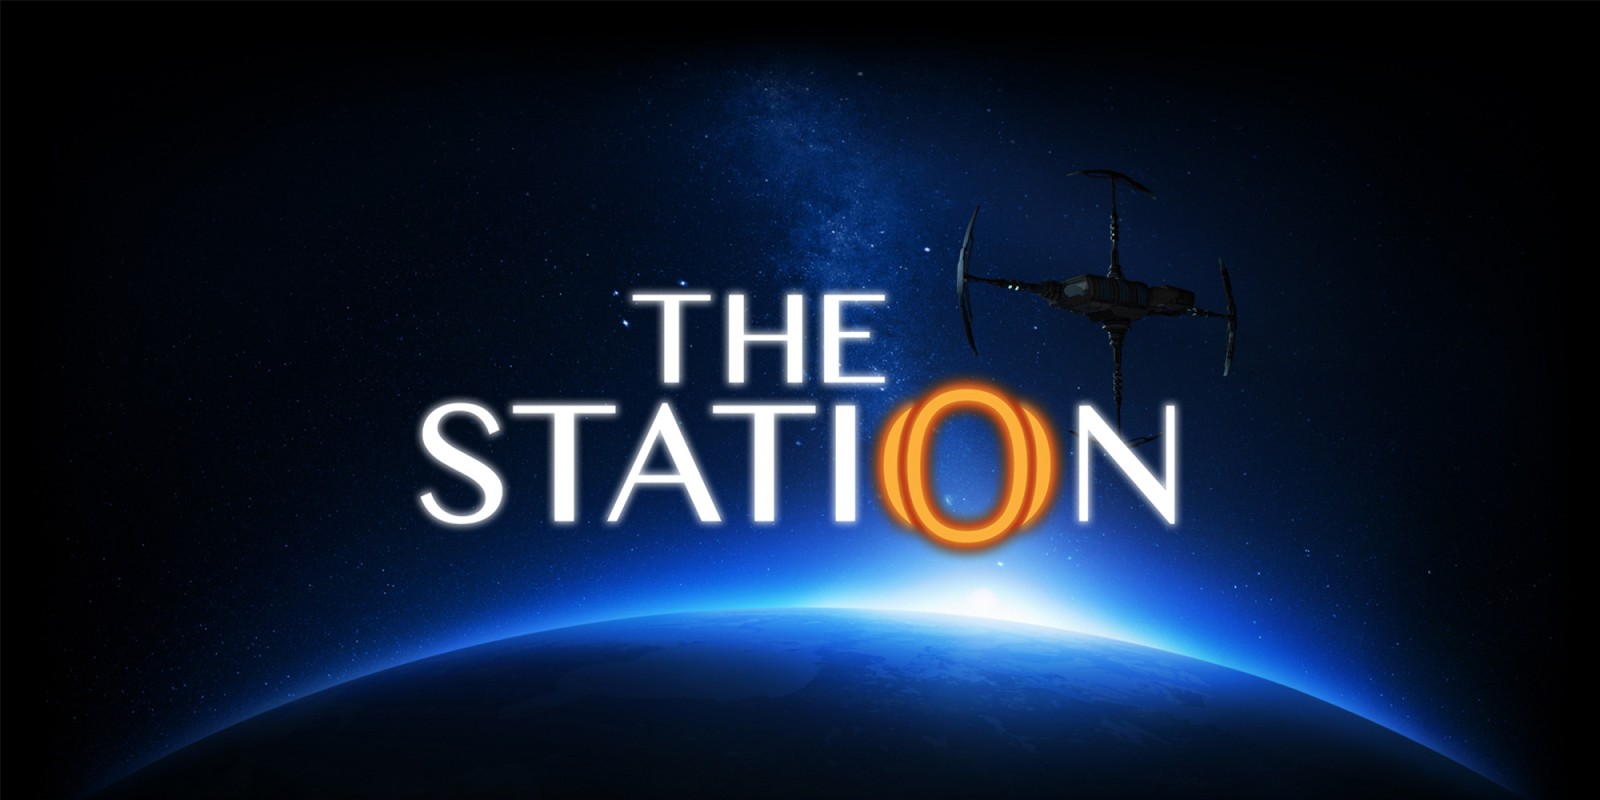 download the final station nintendo switch